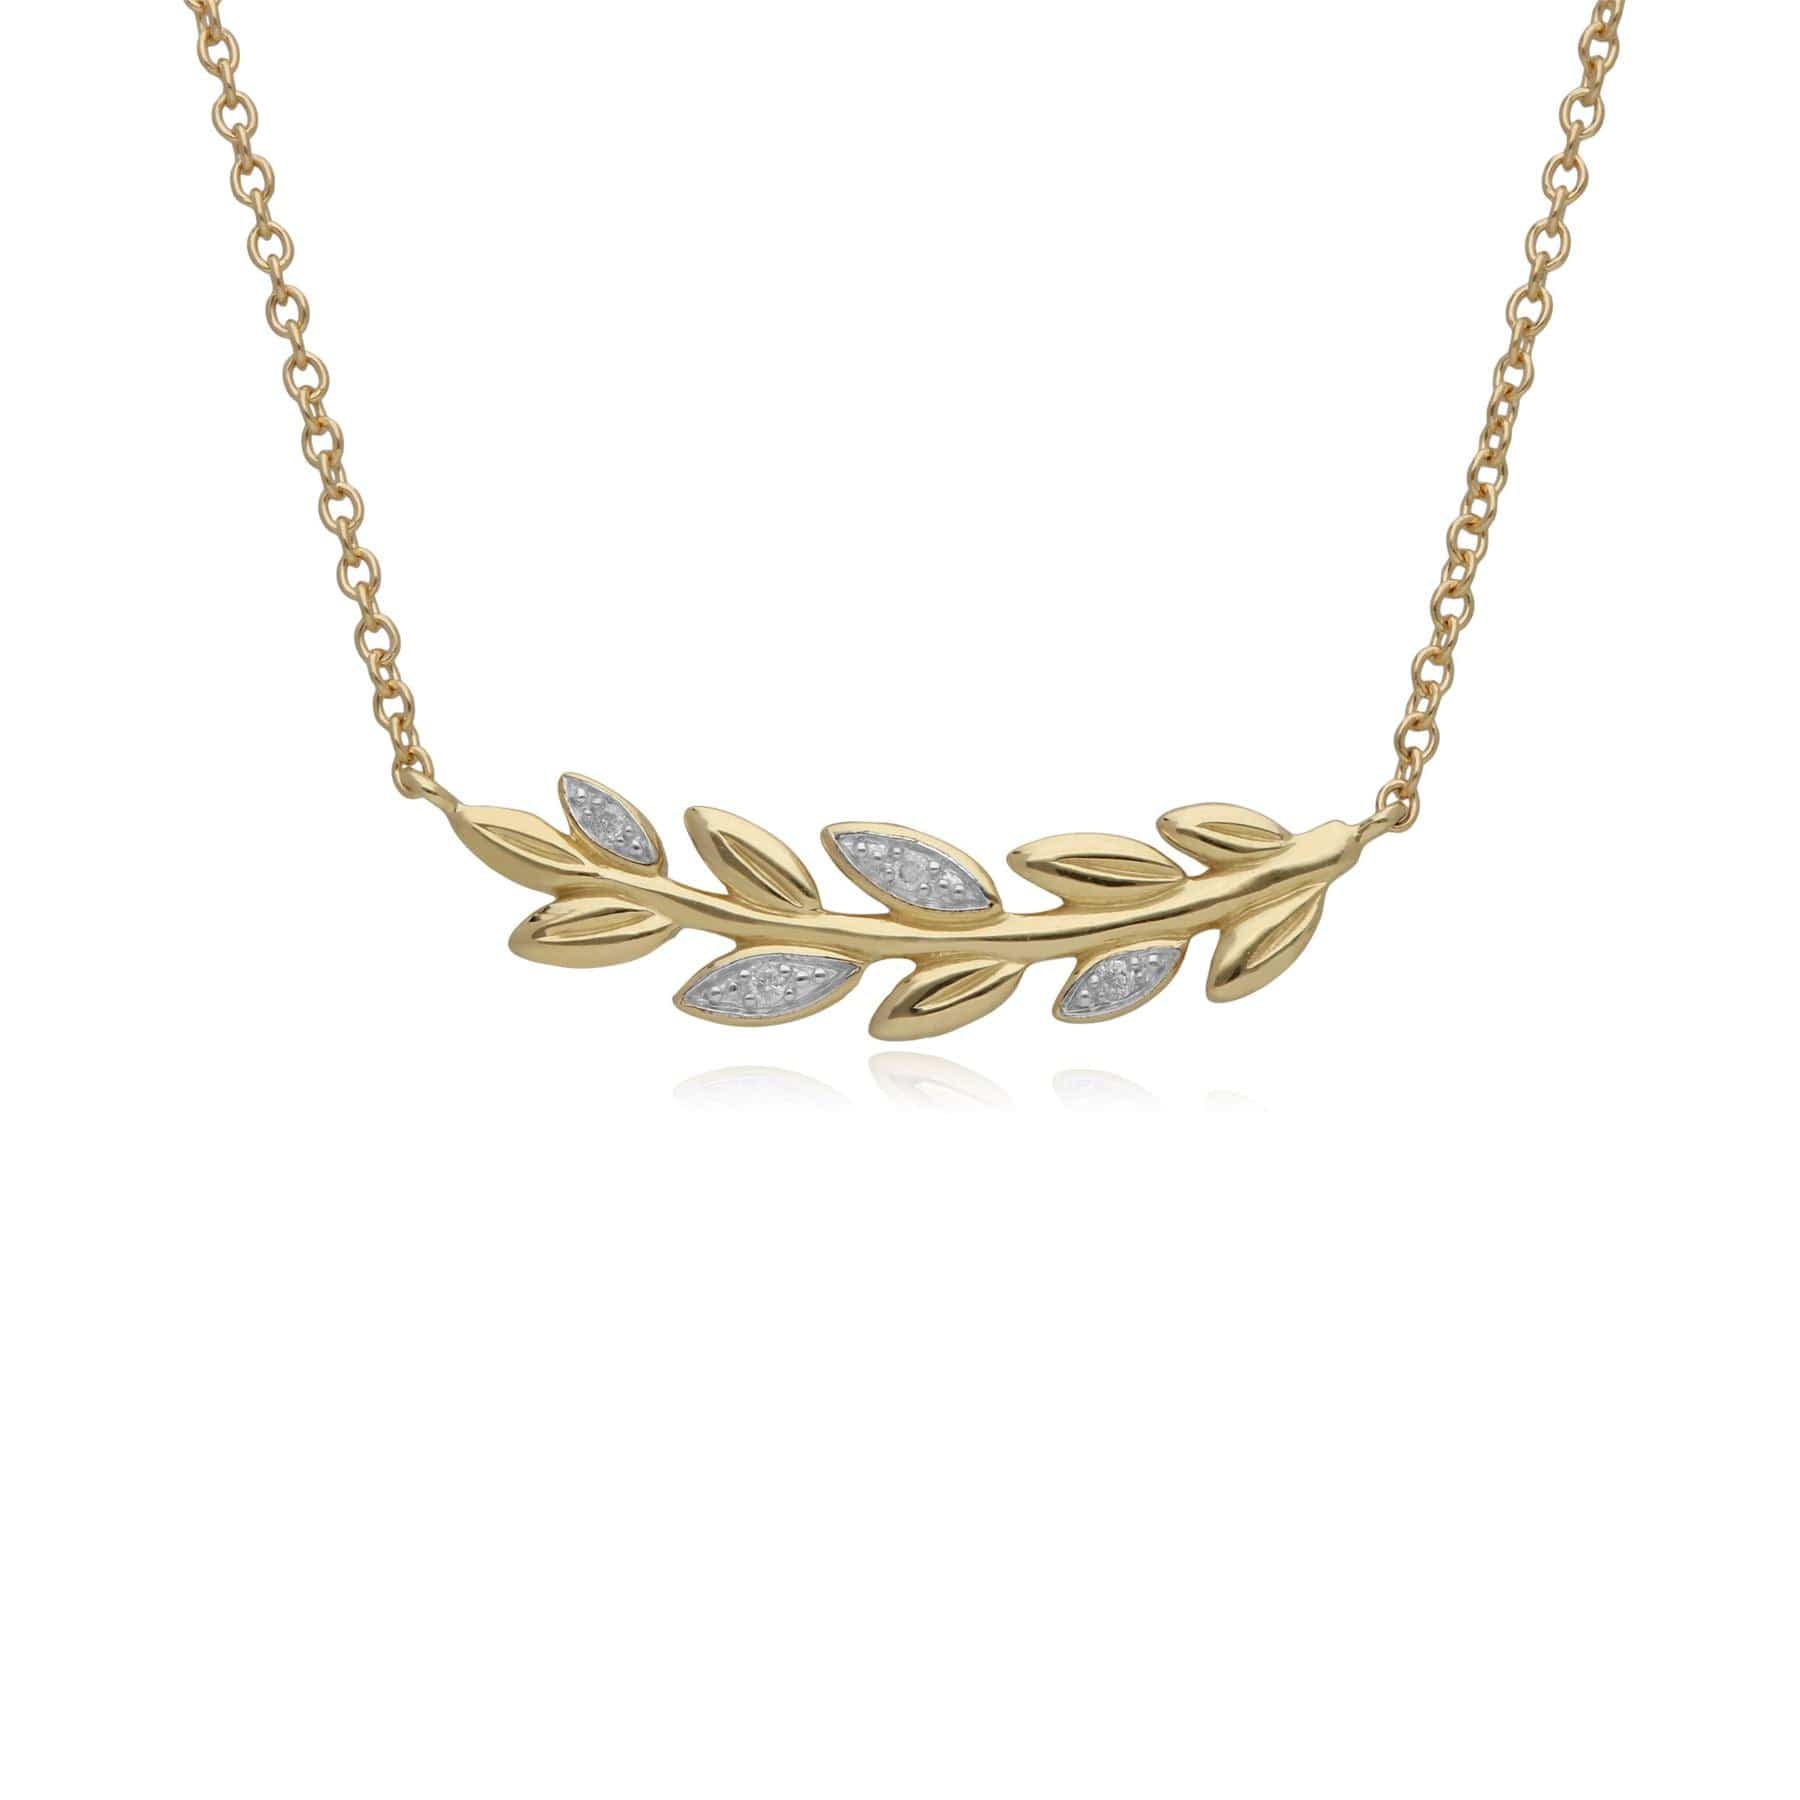 Photos - Pendant / Choker Necklace O Leaf Diamond Necklace in 9ct Yellow Gold